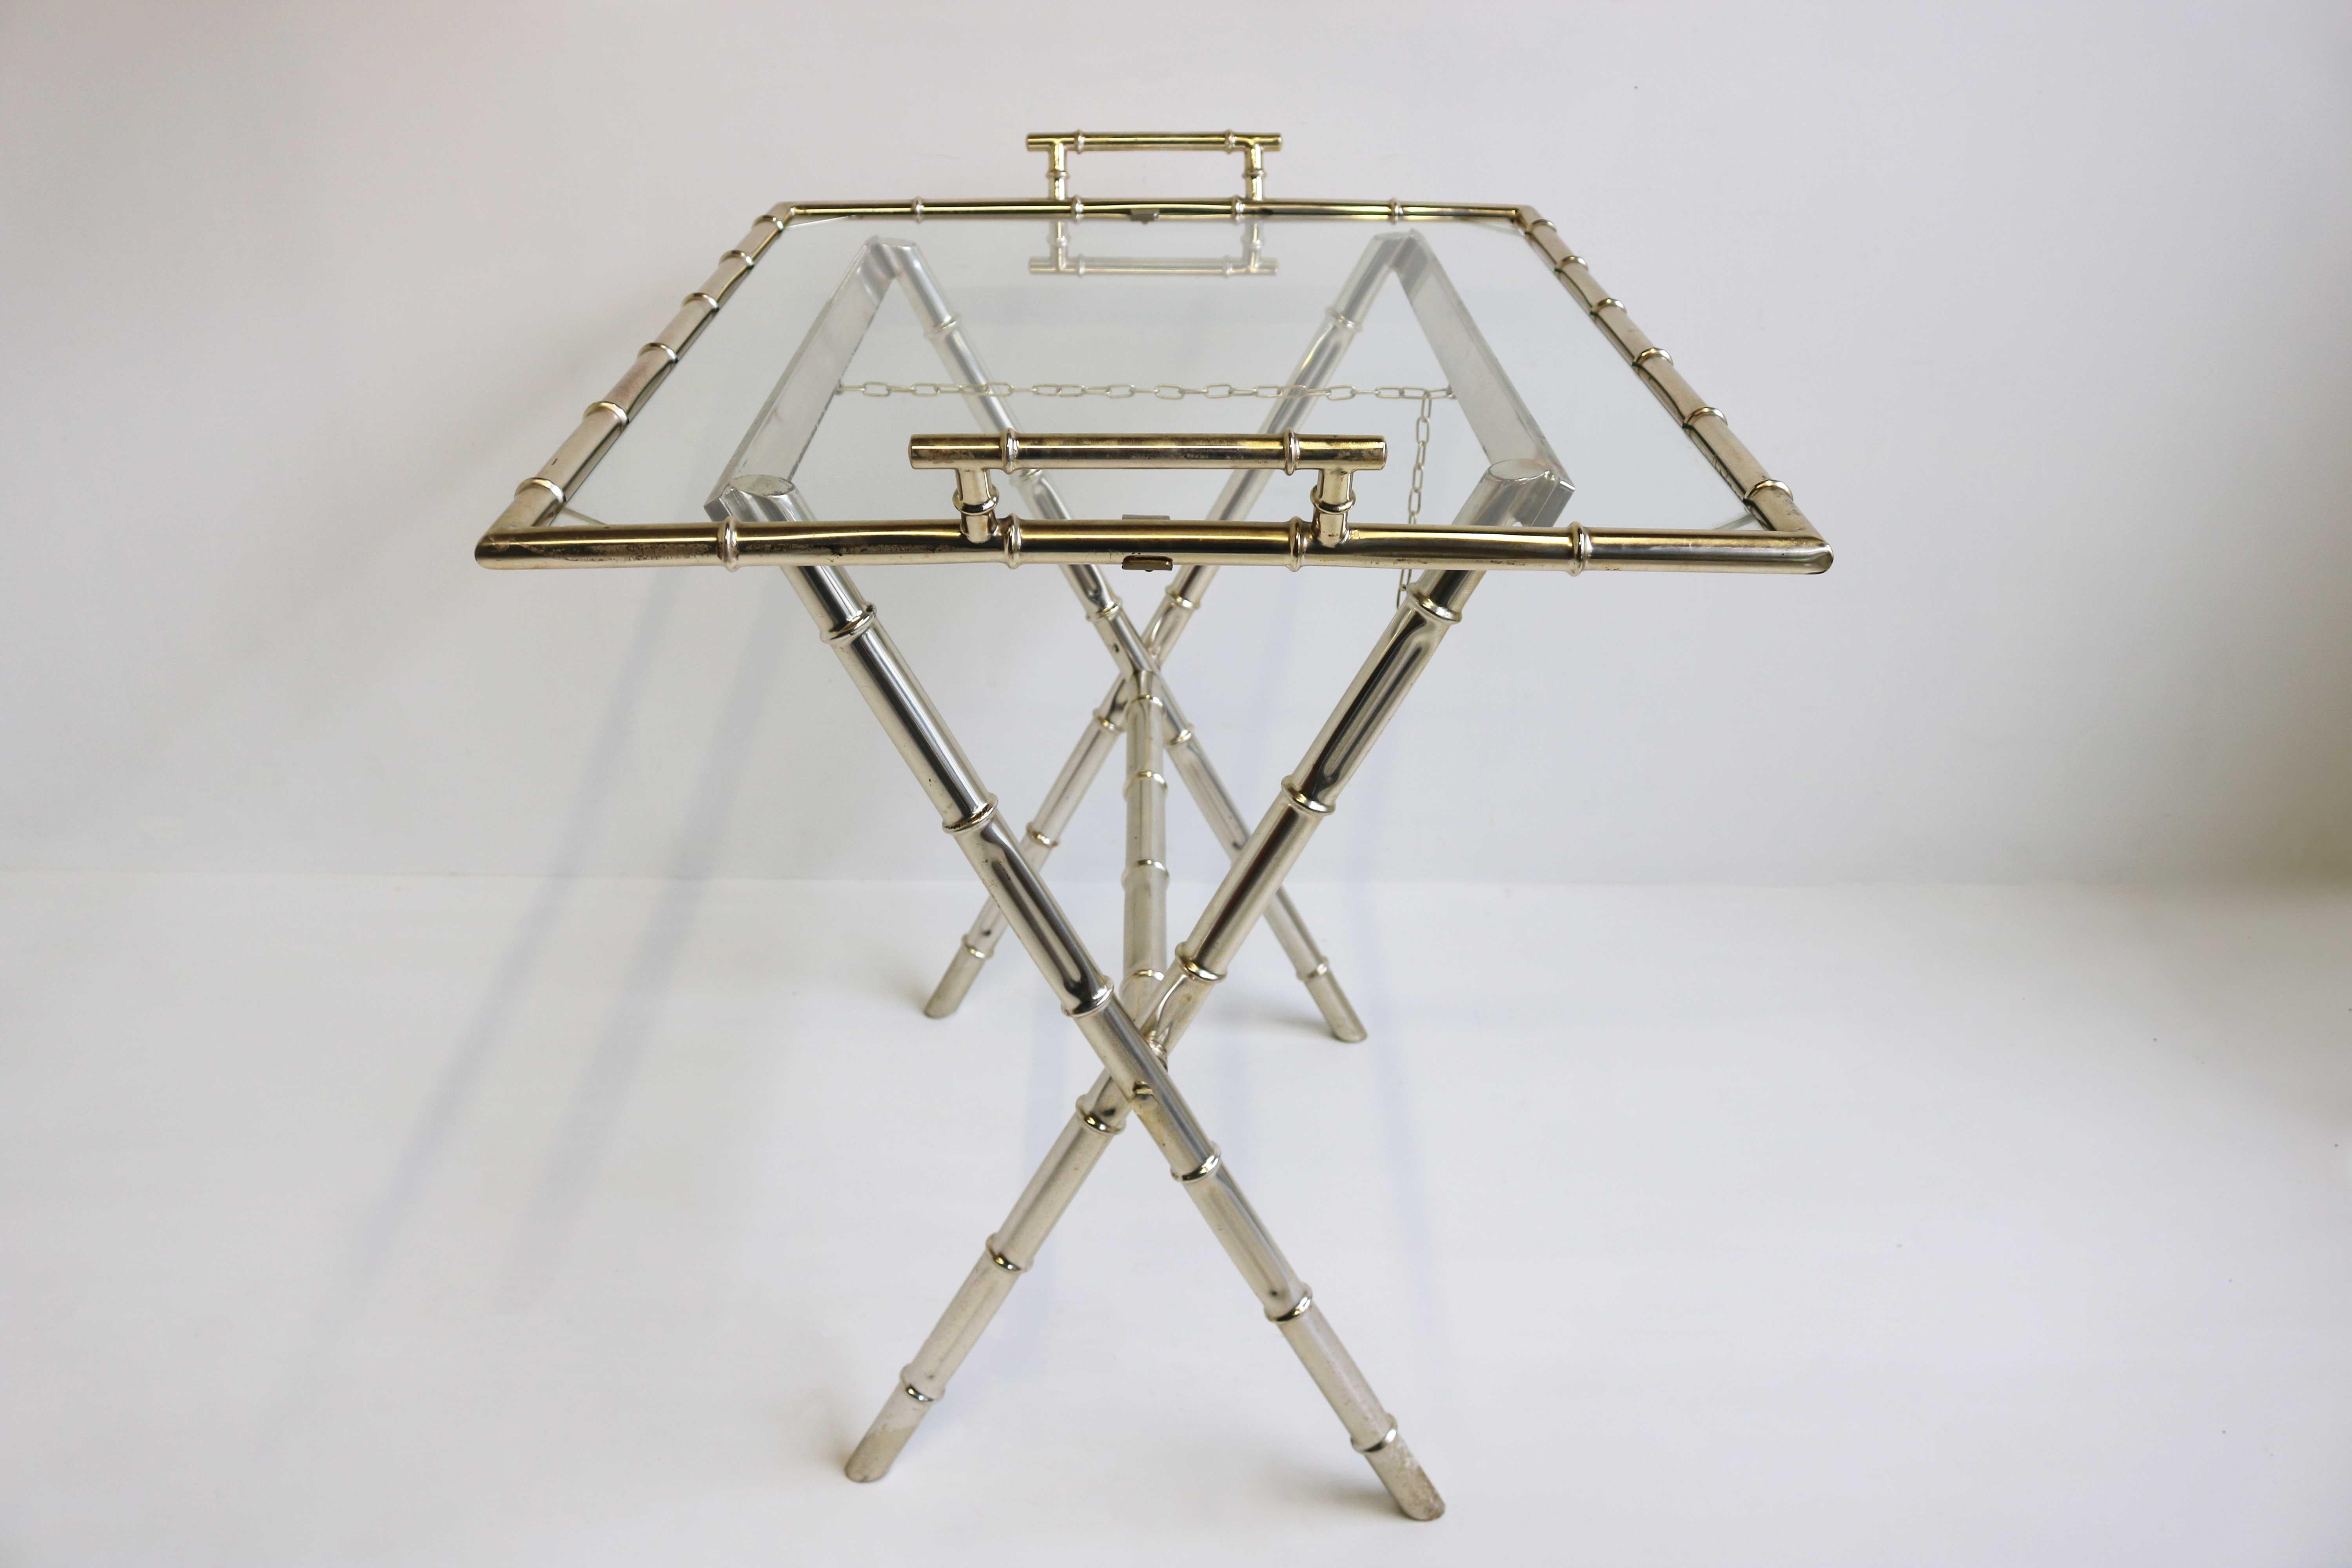 Gorgeous faux bamboo serving stand with glass top by Maison Bagues, France 1960s. 
Height adjustable and foldable stand holding a clear glass serving tray. 
To be used to display and carry cocktails and drinks!
Glass top in good vintage